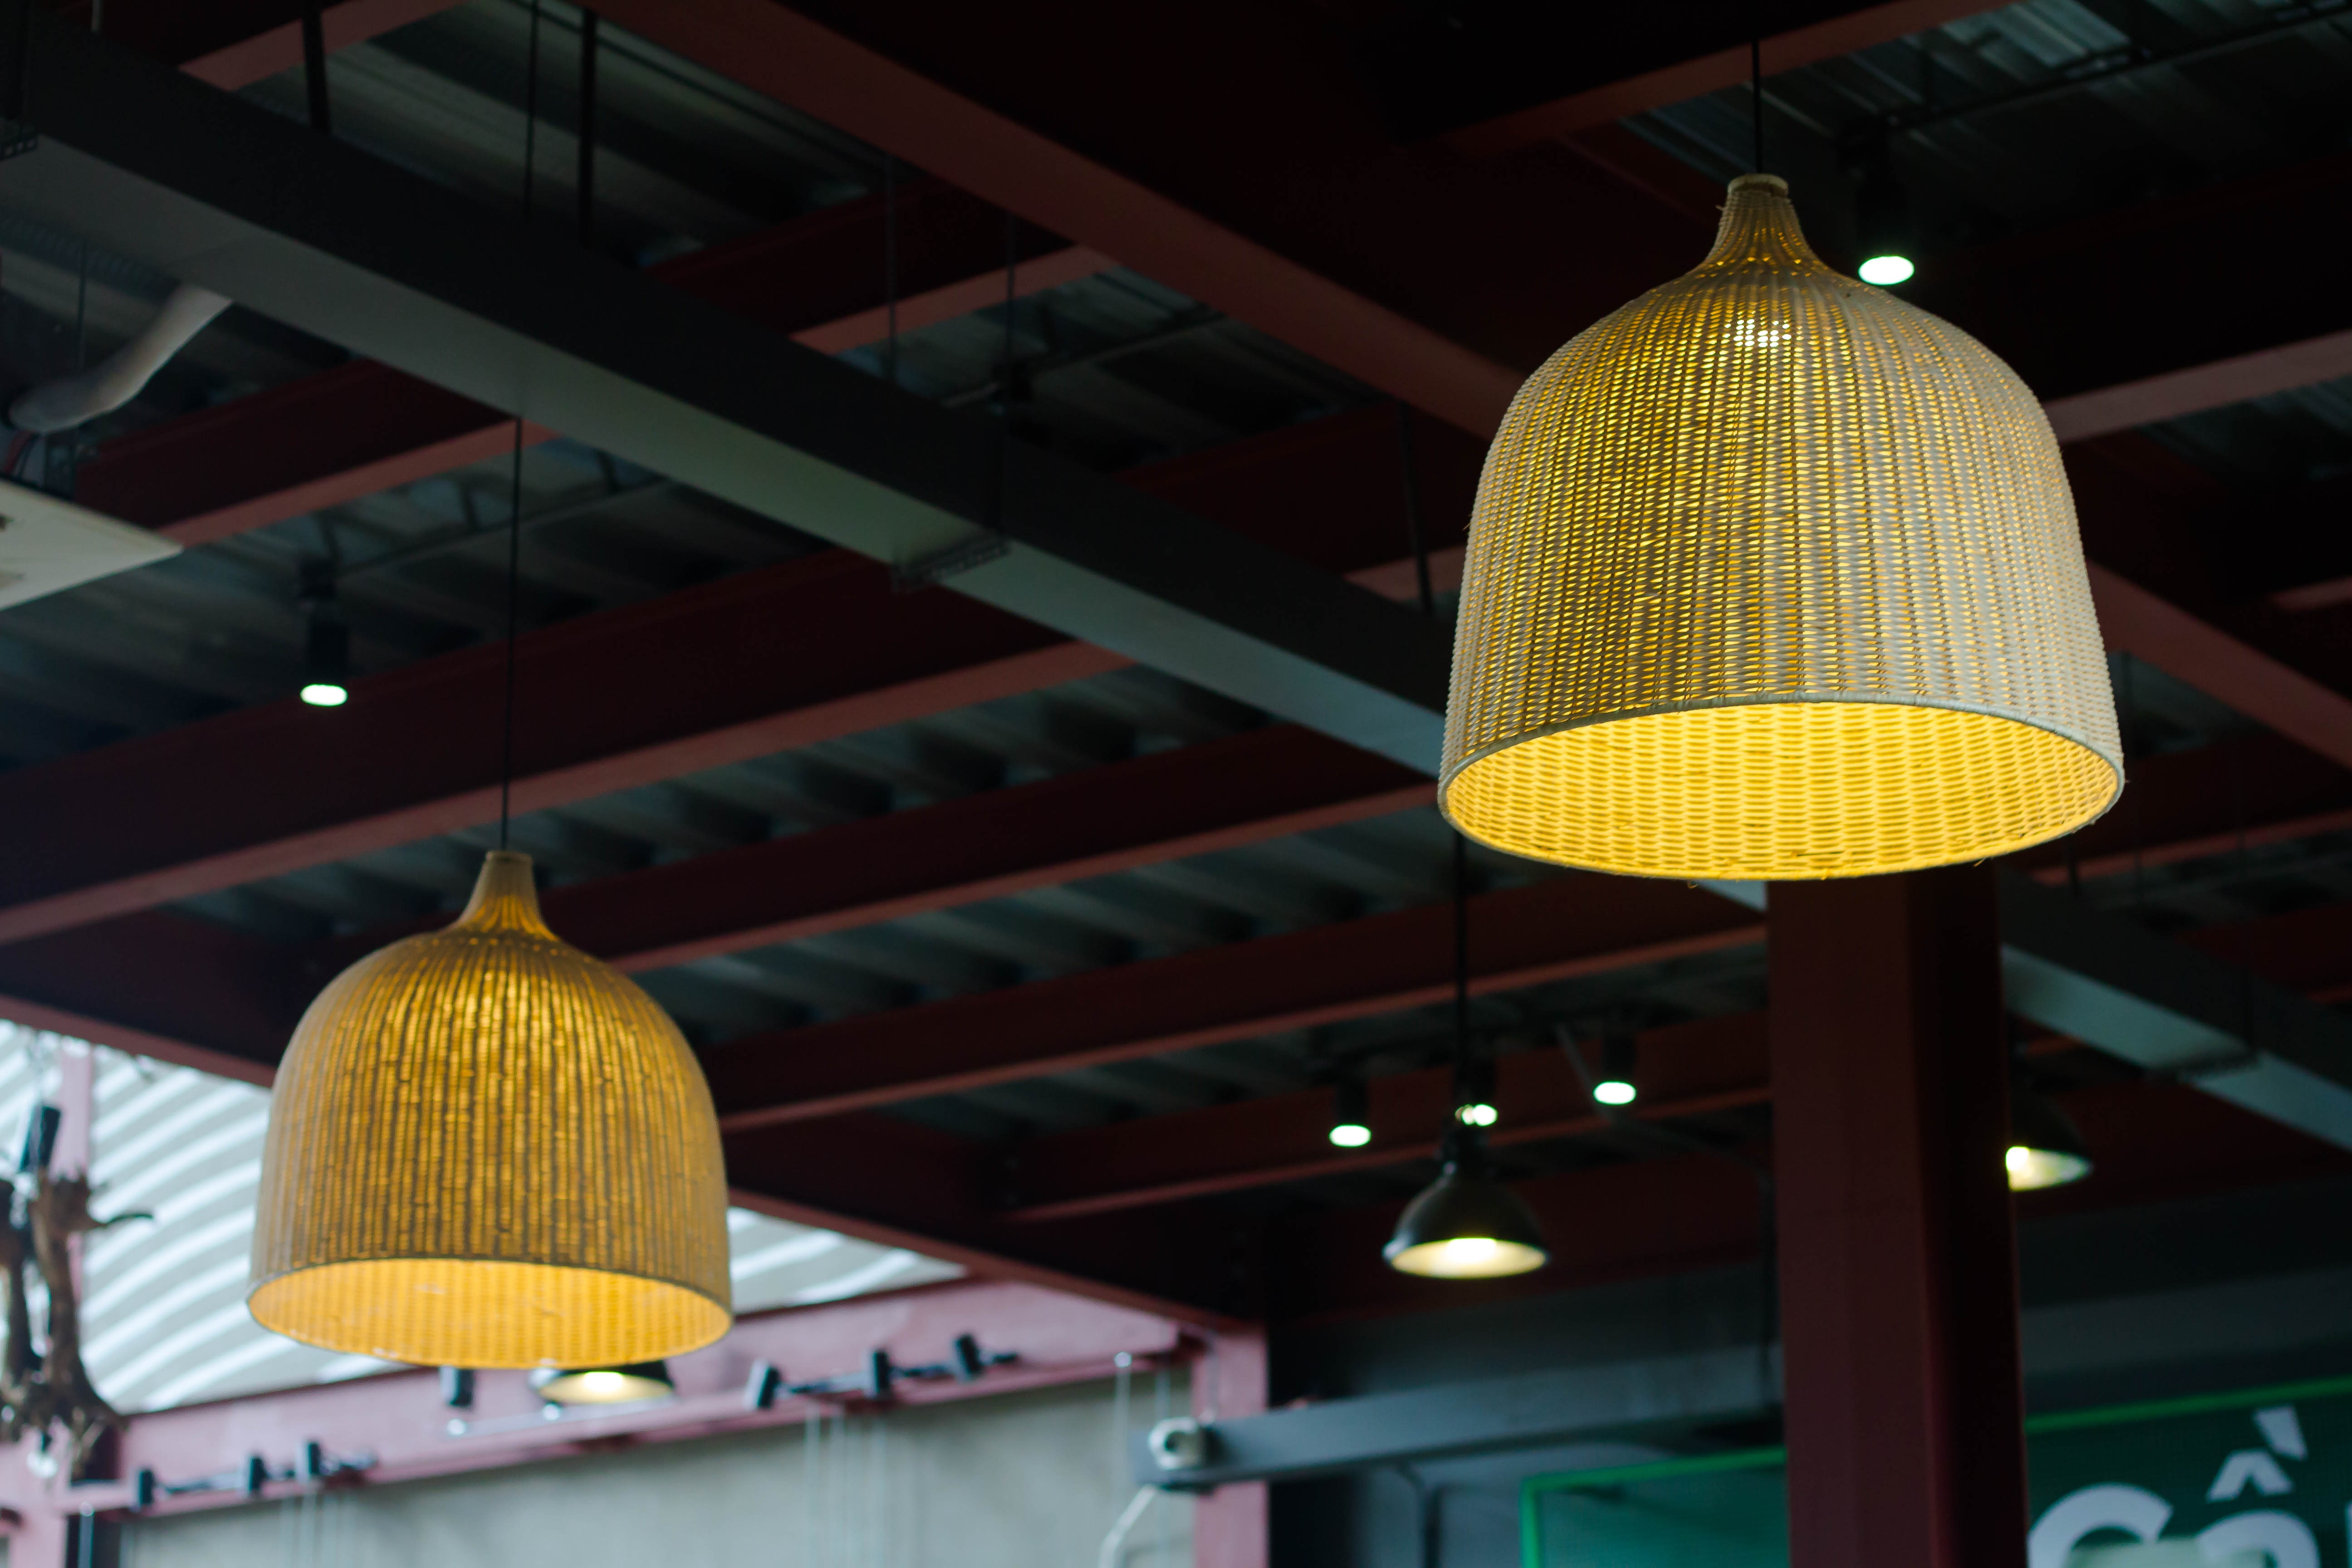 two yellow lighted pendant chandeliers on red and green ceiling